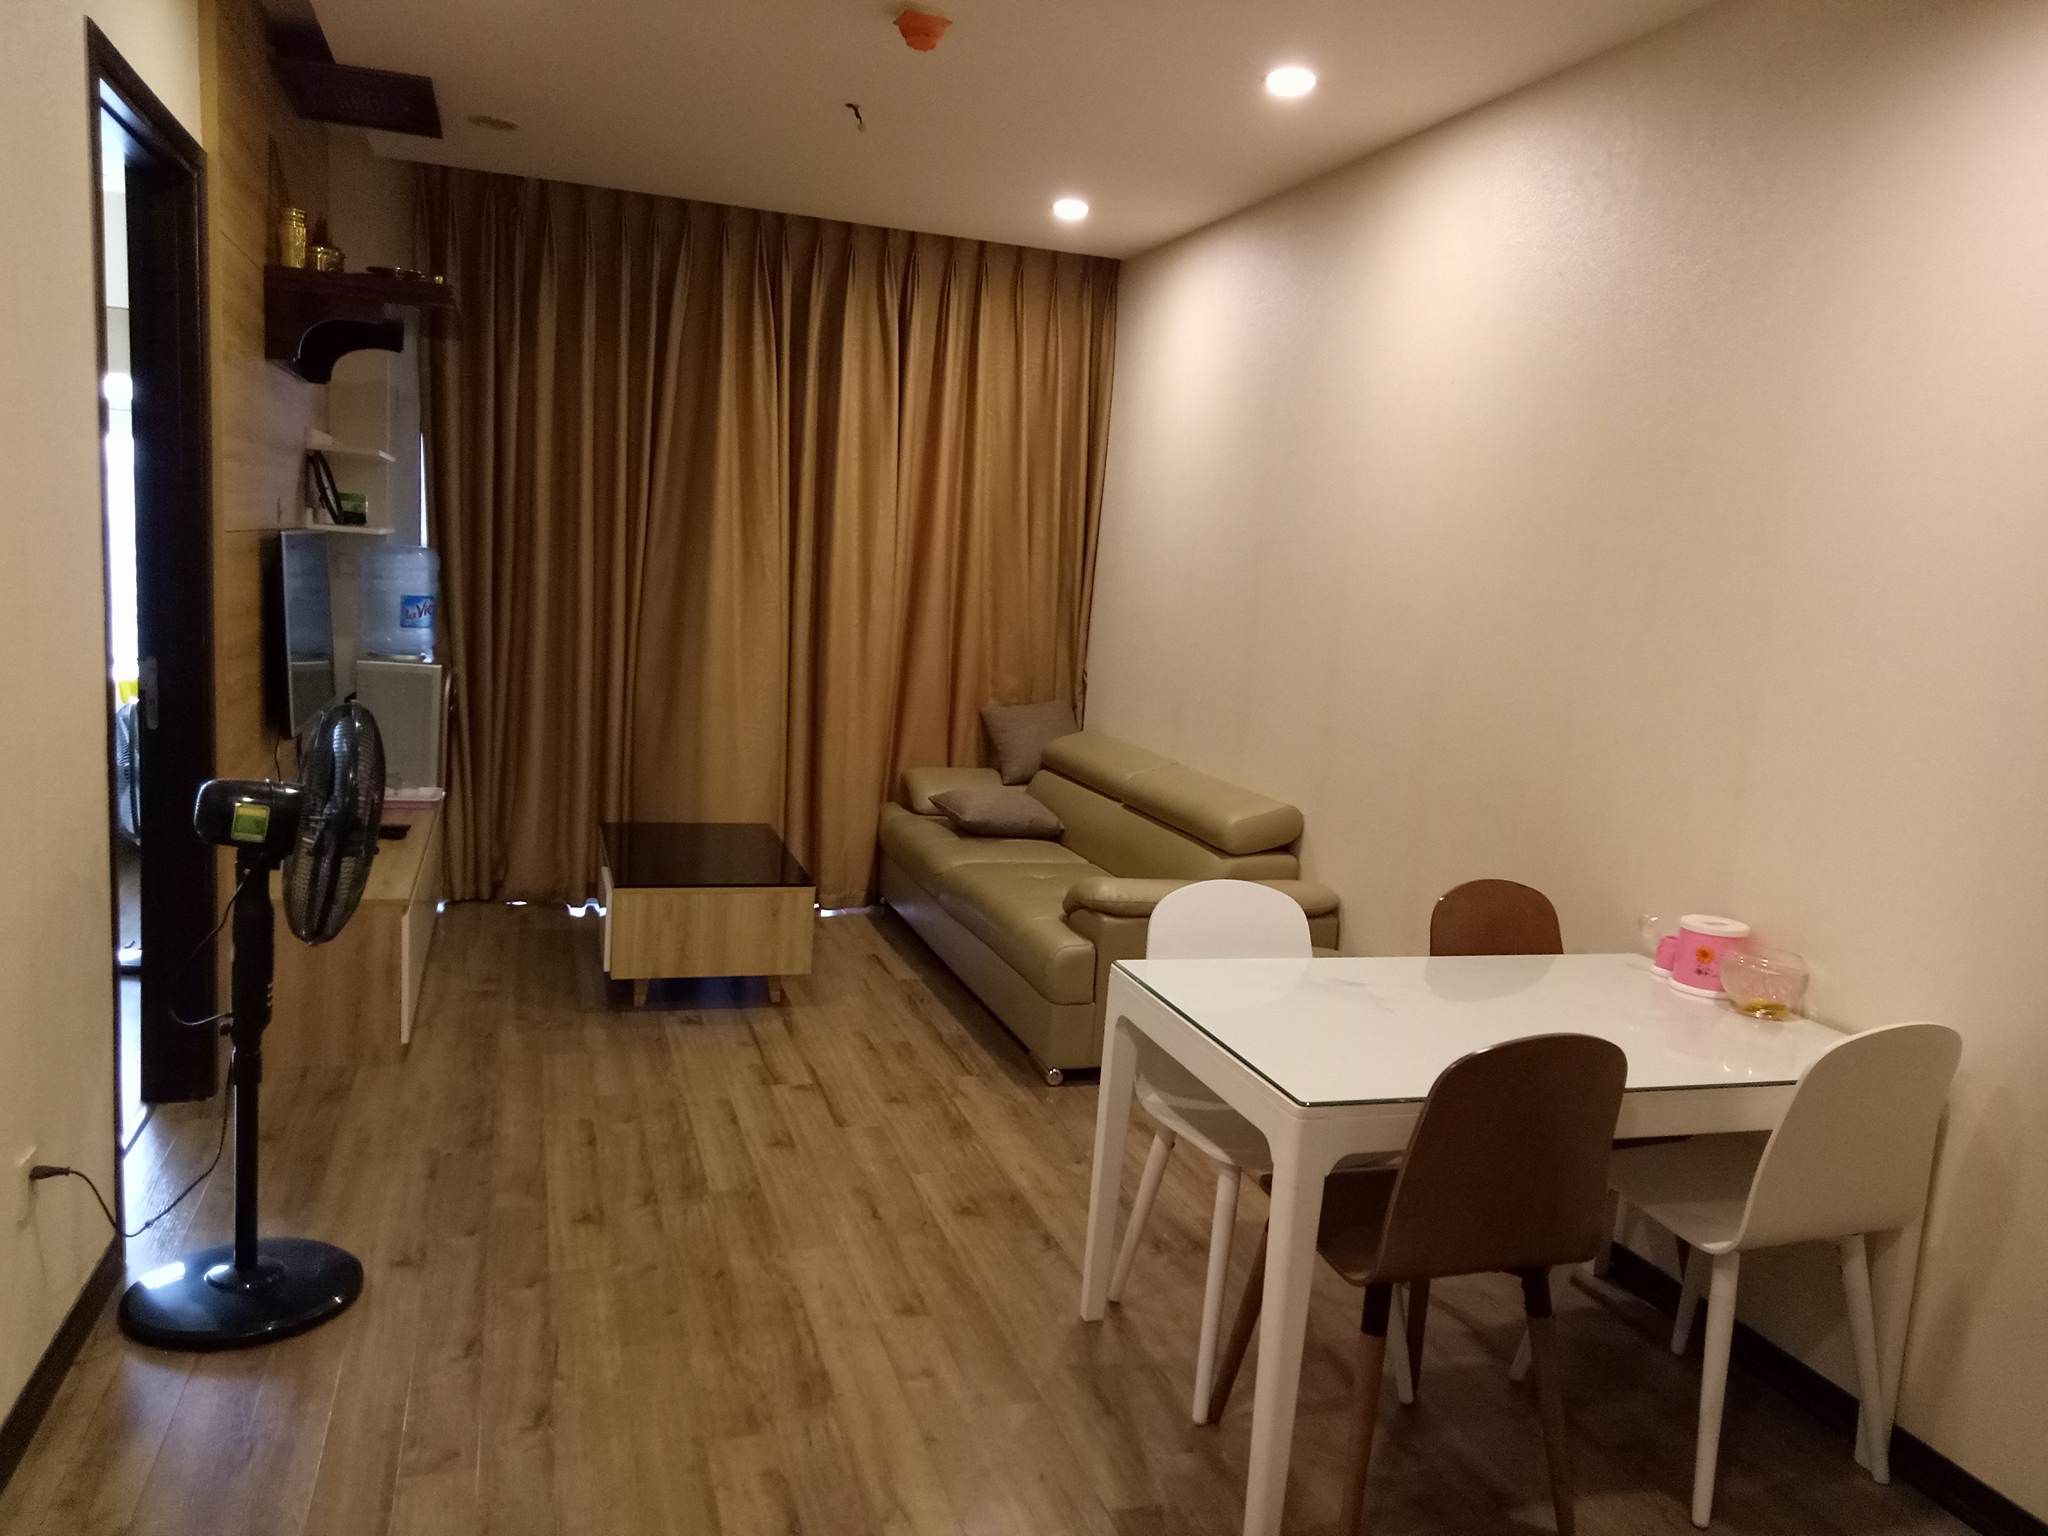 Nice two bedroom apartment for rent in Hoa Binh Green, Hai Ba Trung on 10th floor